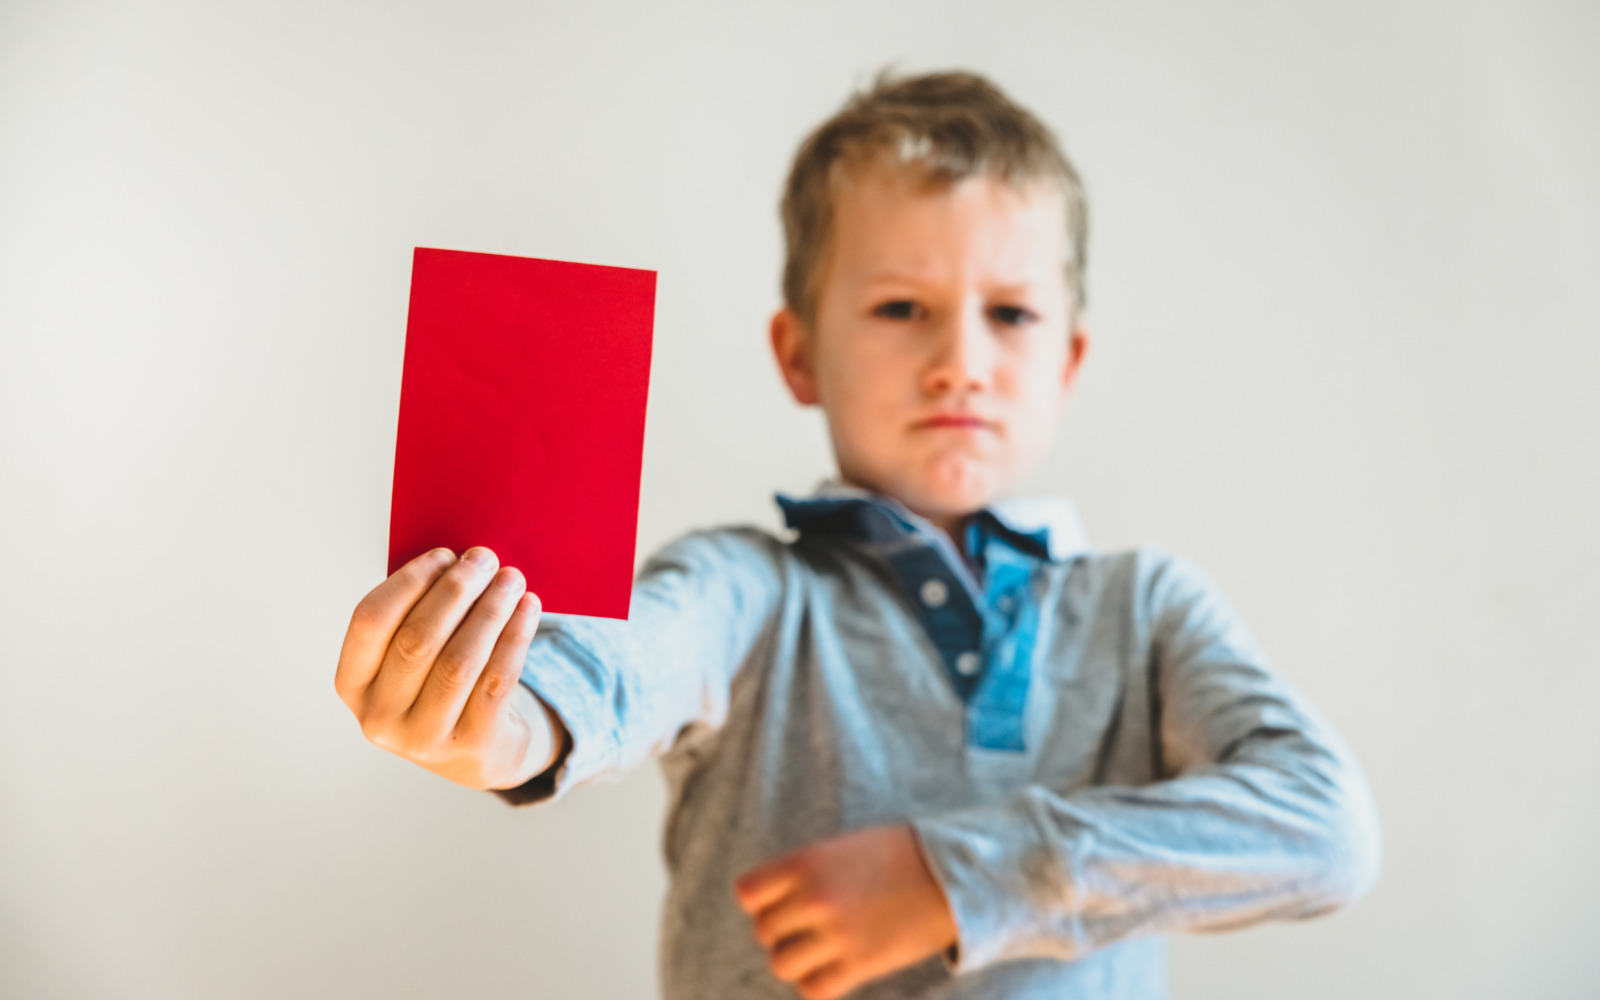 A young boy holding up a red card.